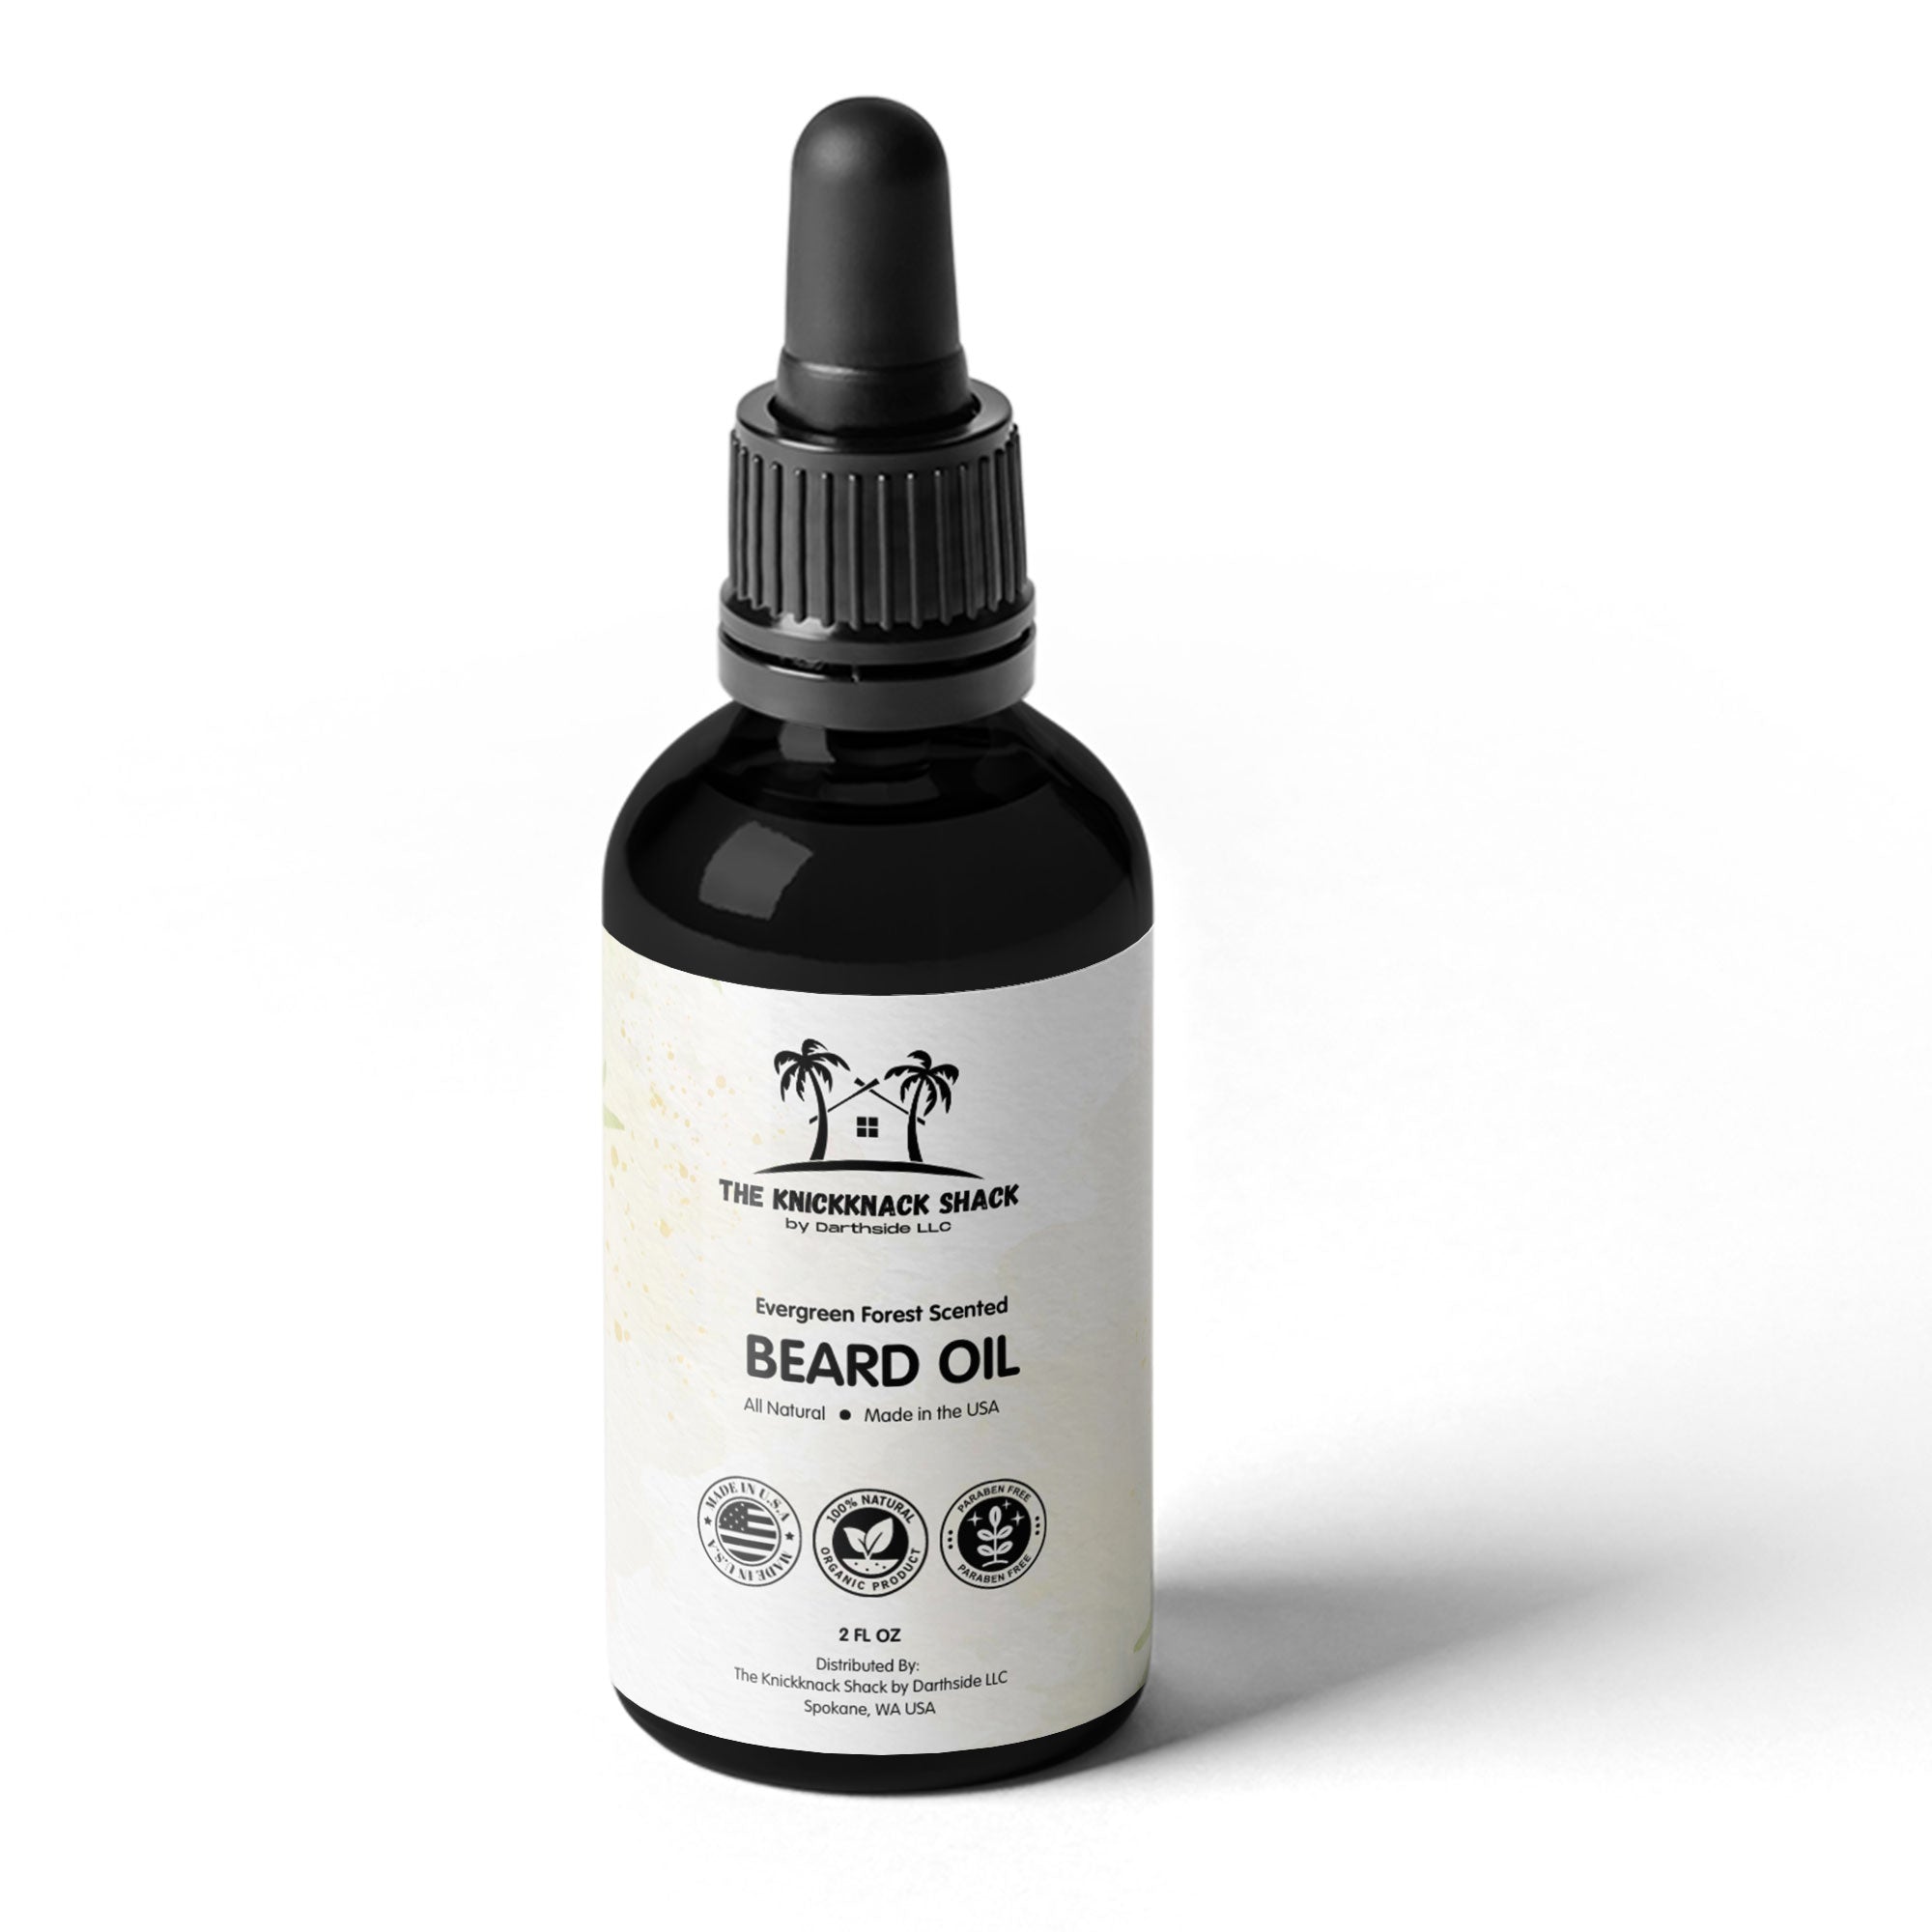 Evergreen Forest Scented Beard Oil